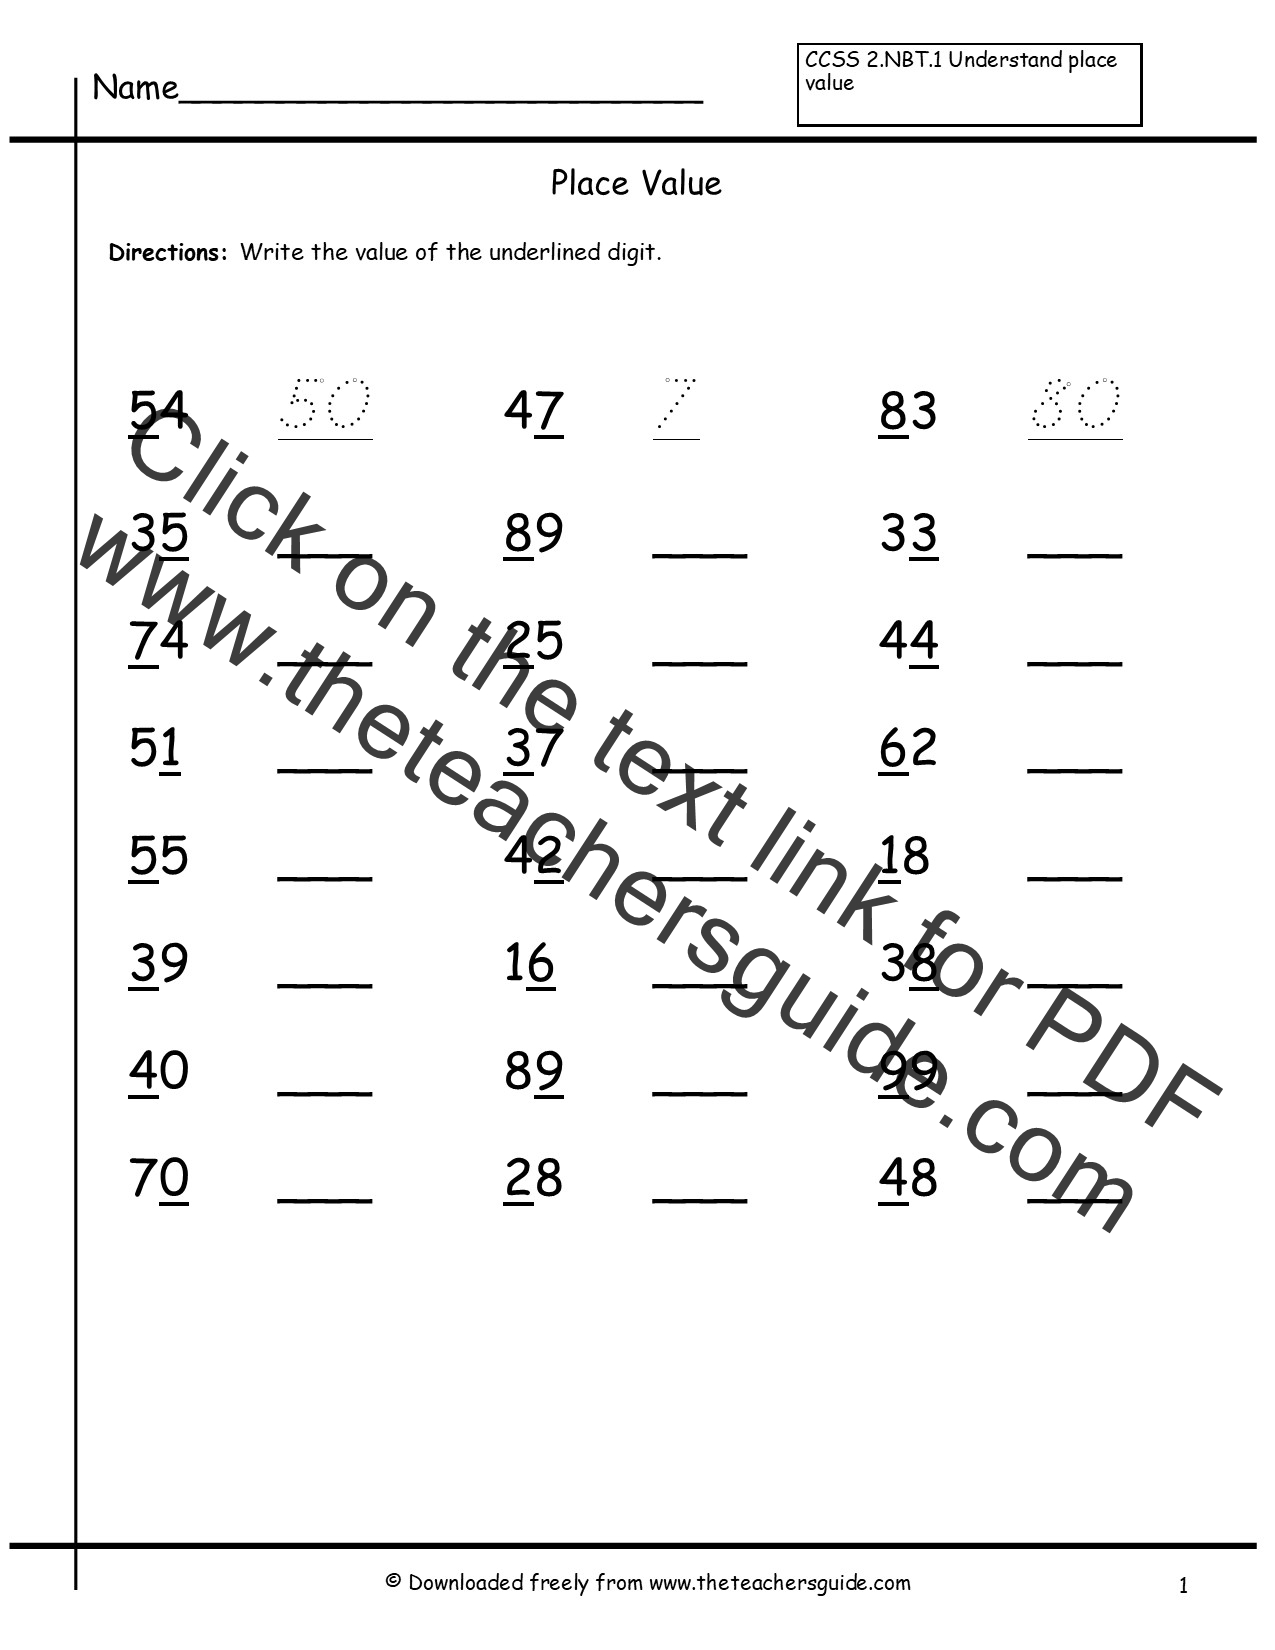 Place Value Worksheets from The Teacher's Guide